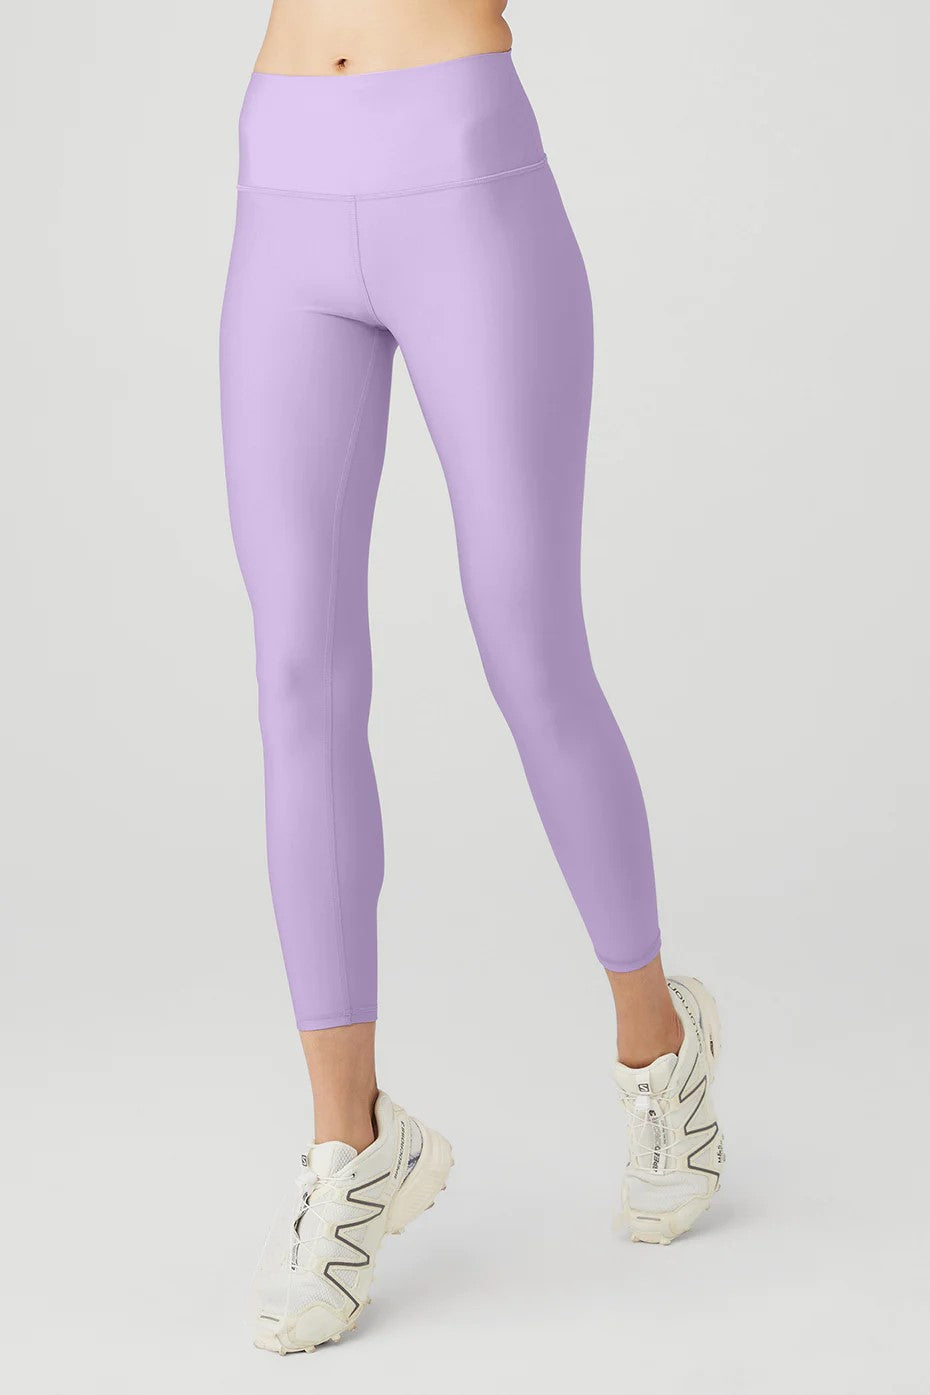 Joy Lab Woman's XS Plum Purple High Rise Perforated Athletic Work Out  Leggings